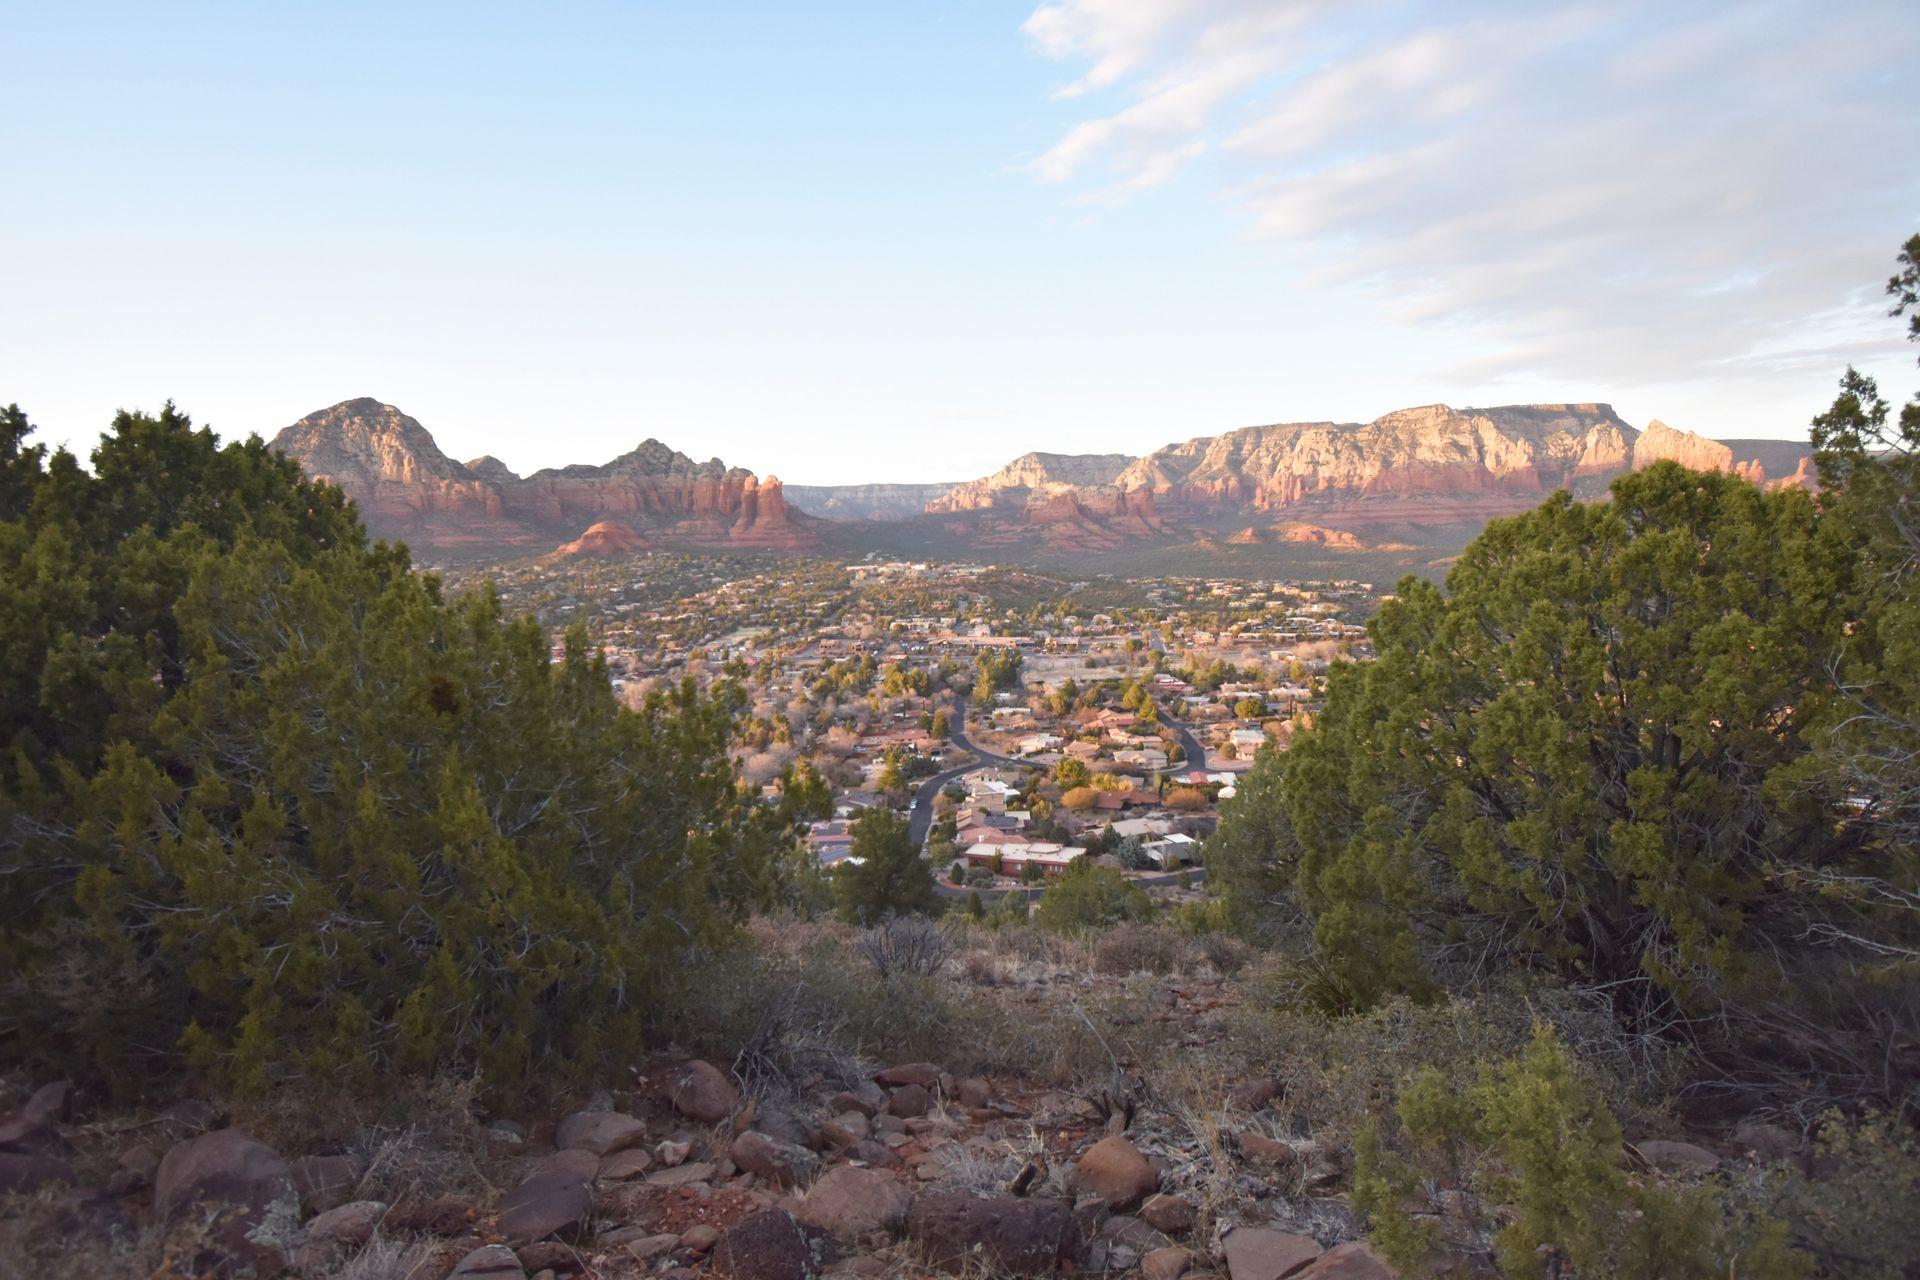 A view looking down at Sedona with mountains in the background.